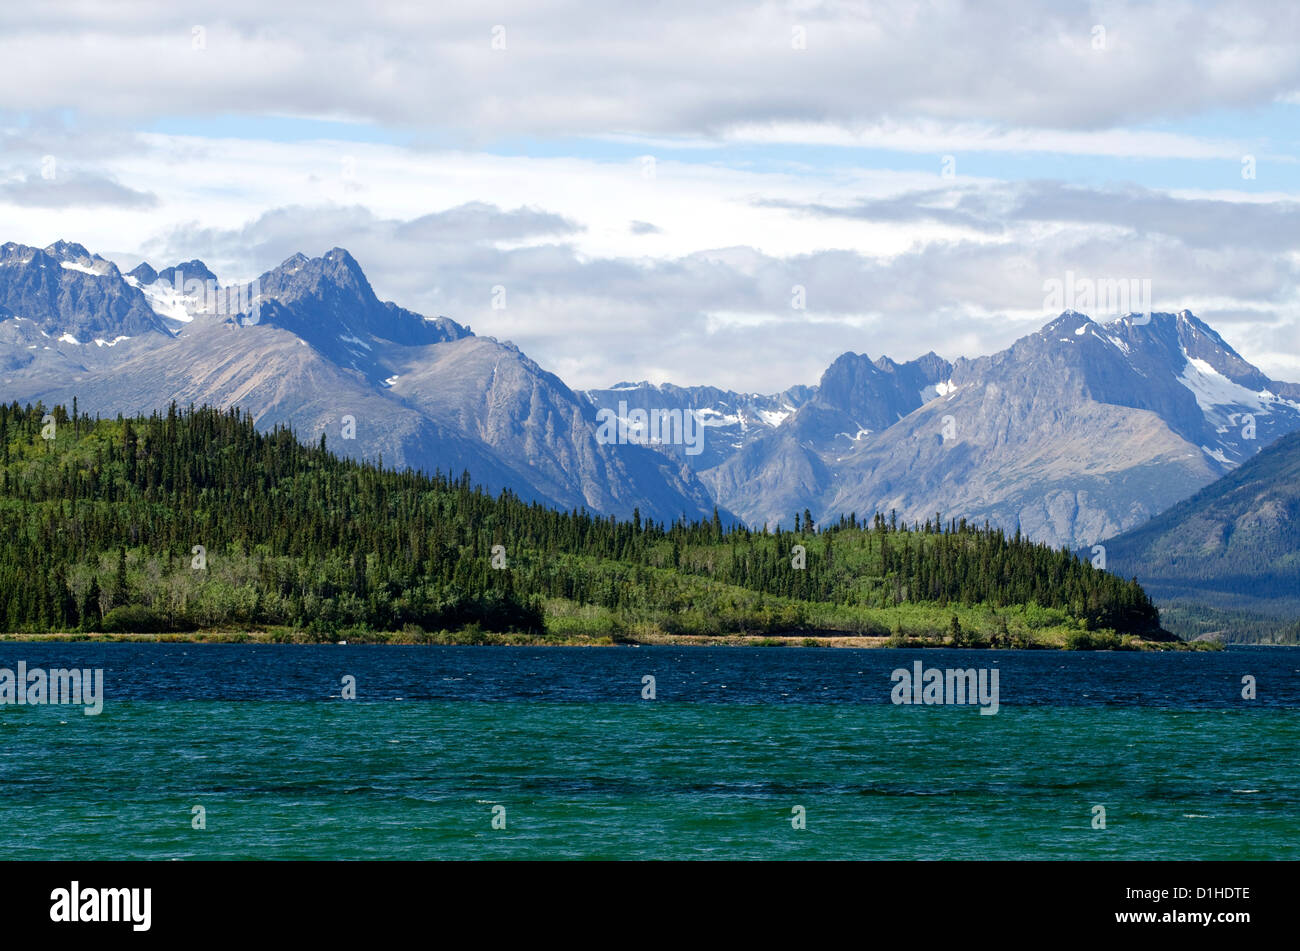 Looking across Bennett Lake at large mountain peaks in the town of Carcross in the Yukon Territory, Canada. Stock Photo